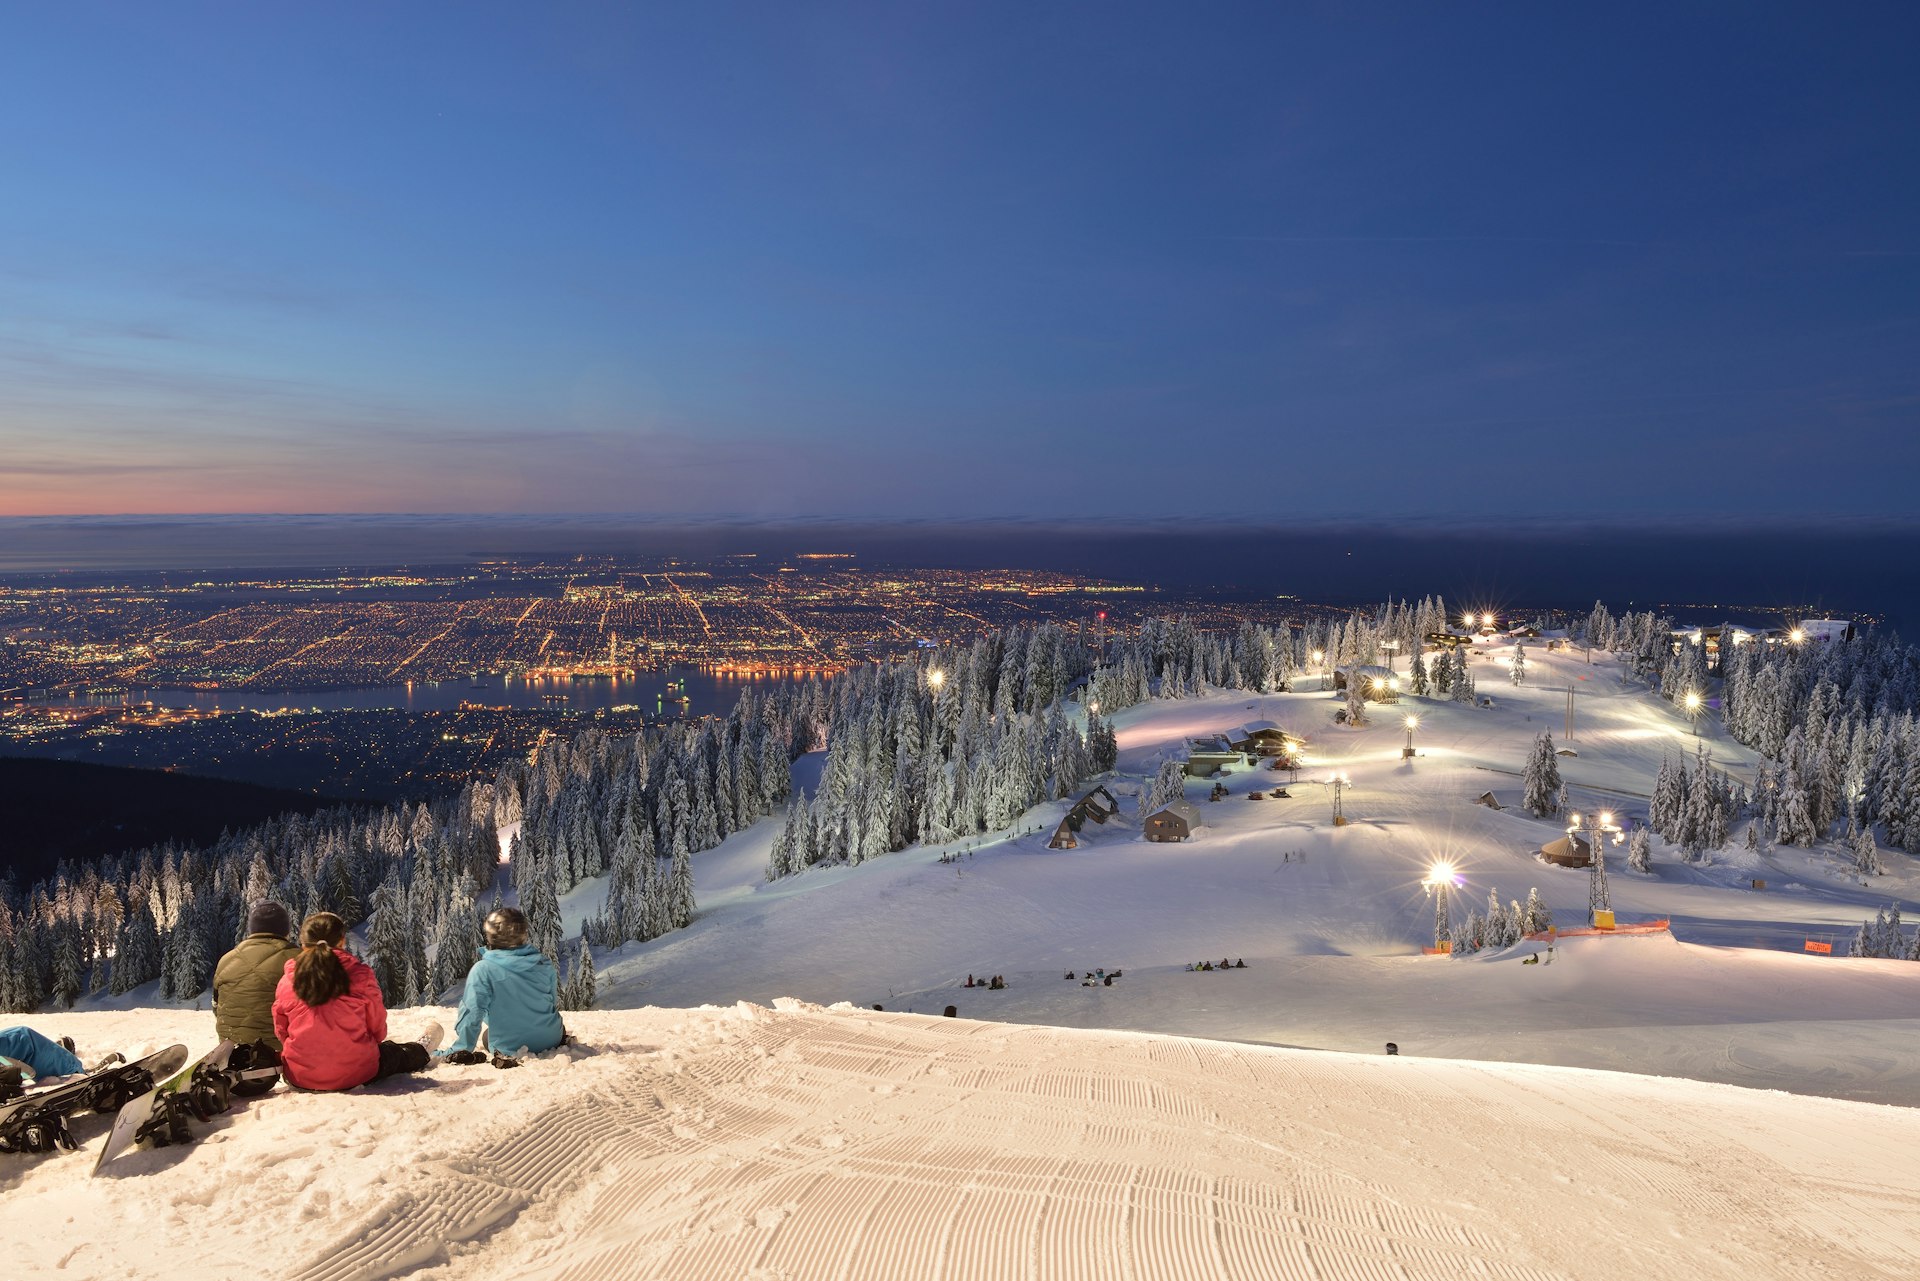 Three people - skiere and snowboarders - wait for sunrise on Grouse Mountain